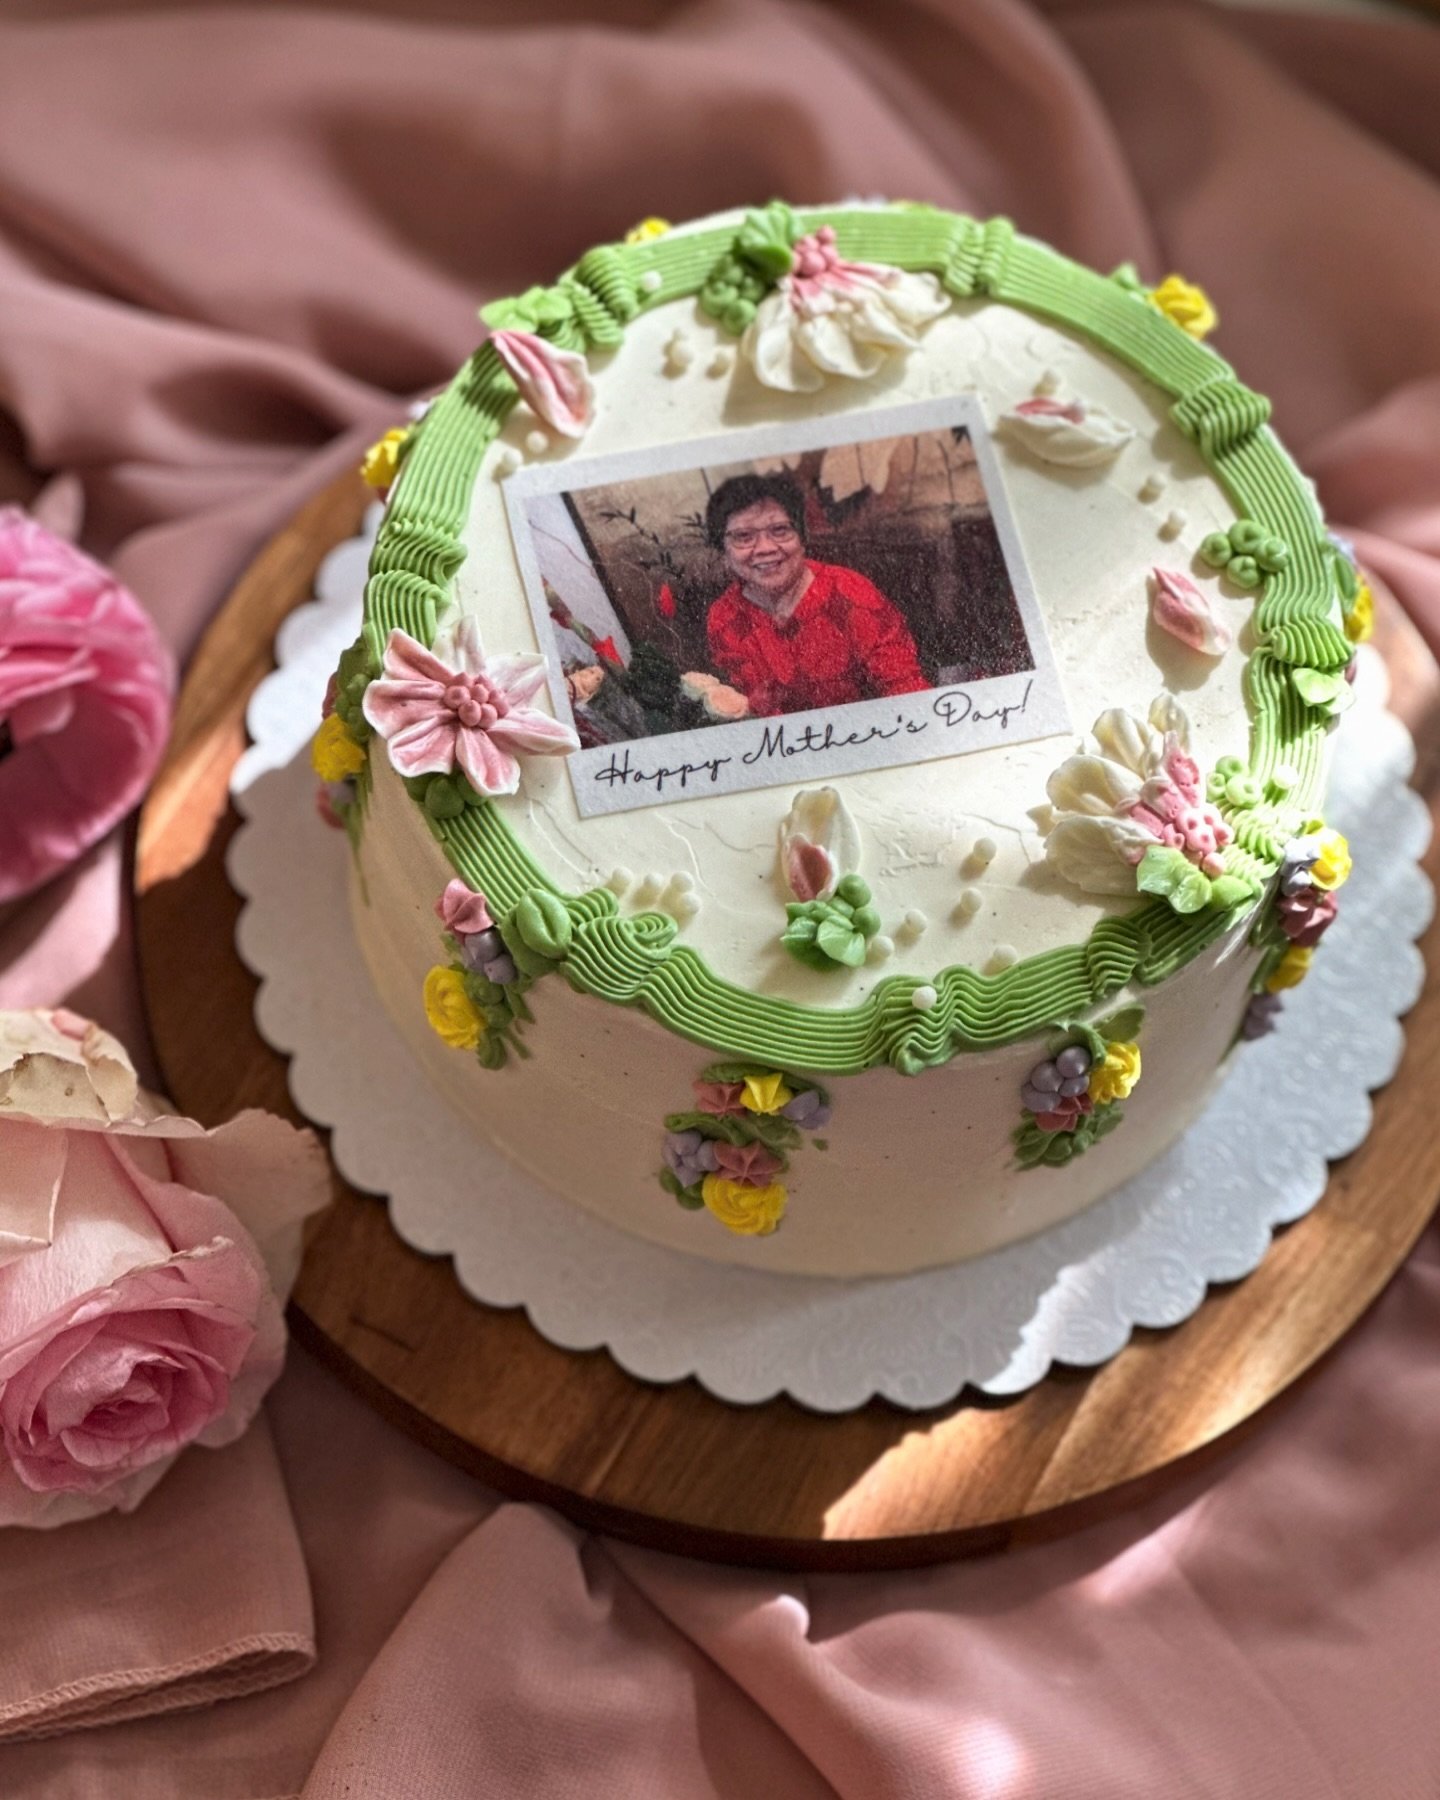 This Mother&rsquo;s Day, celebrate the amazing women who have nurtured and loved you! 💐

Surprise your Mom, Grandma, Aunt, or mother-figures in your life with a custom cake featuring your favorite photo of them!

Pre-order your Polaroid Mom (or Mom-